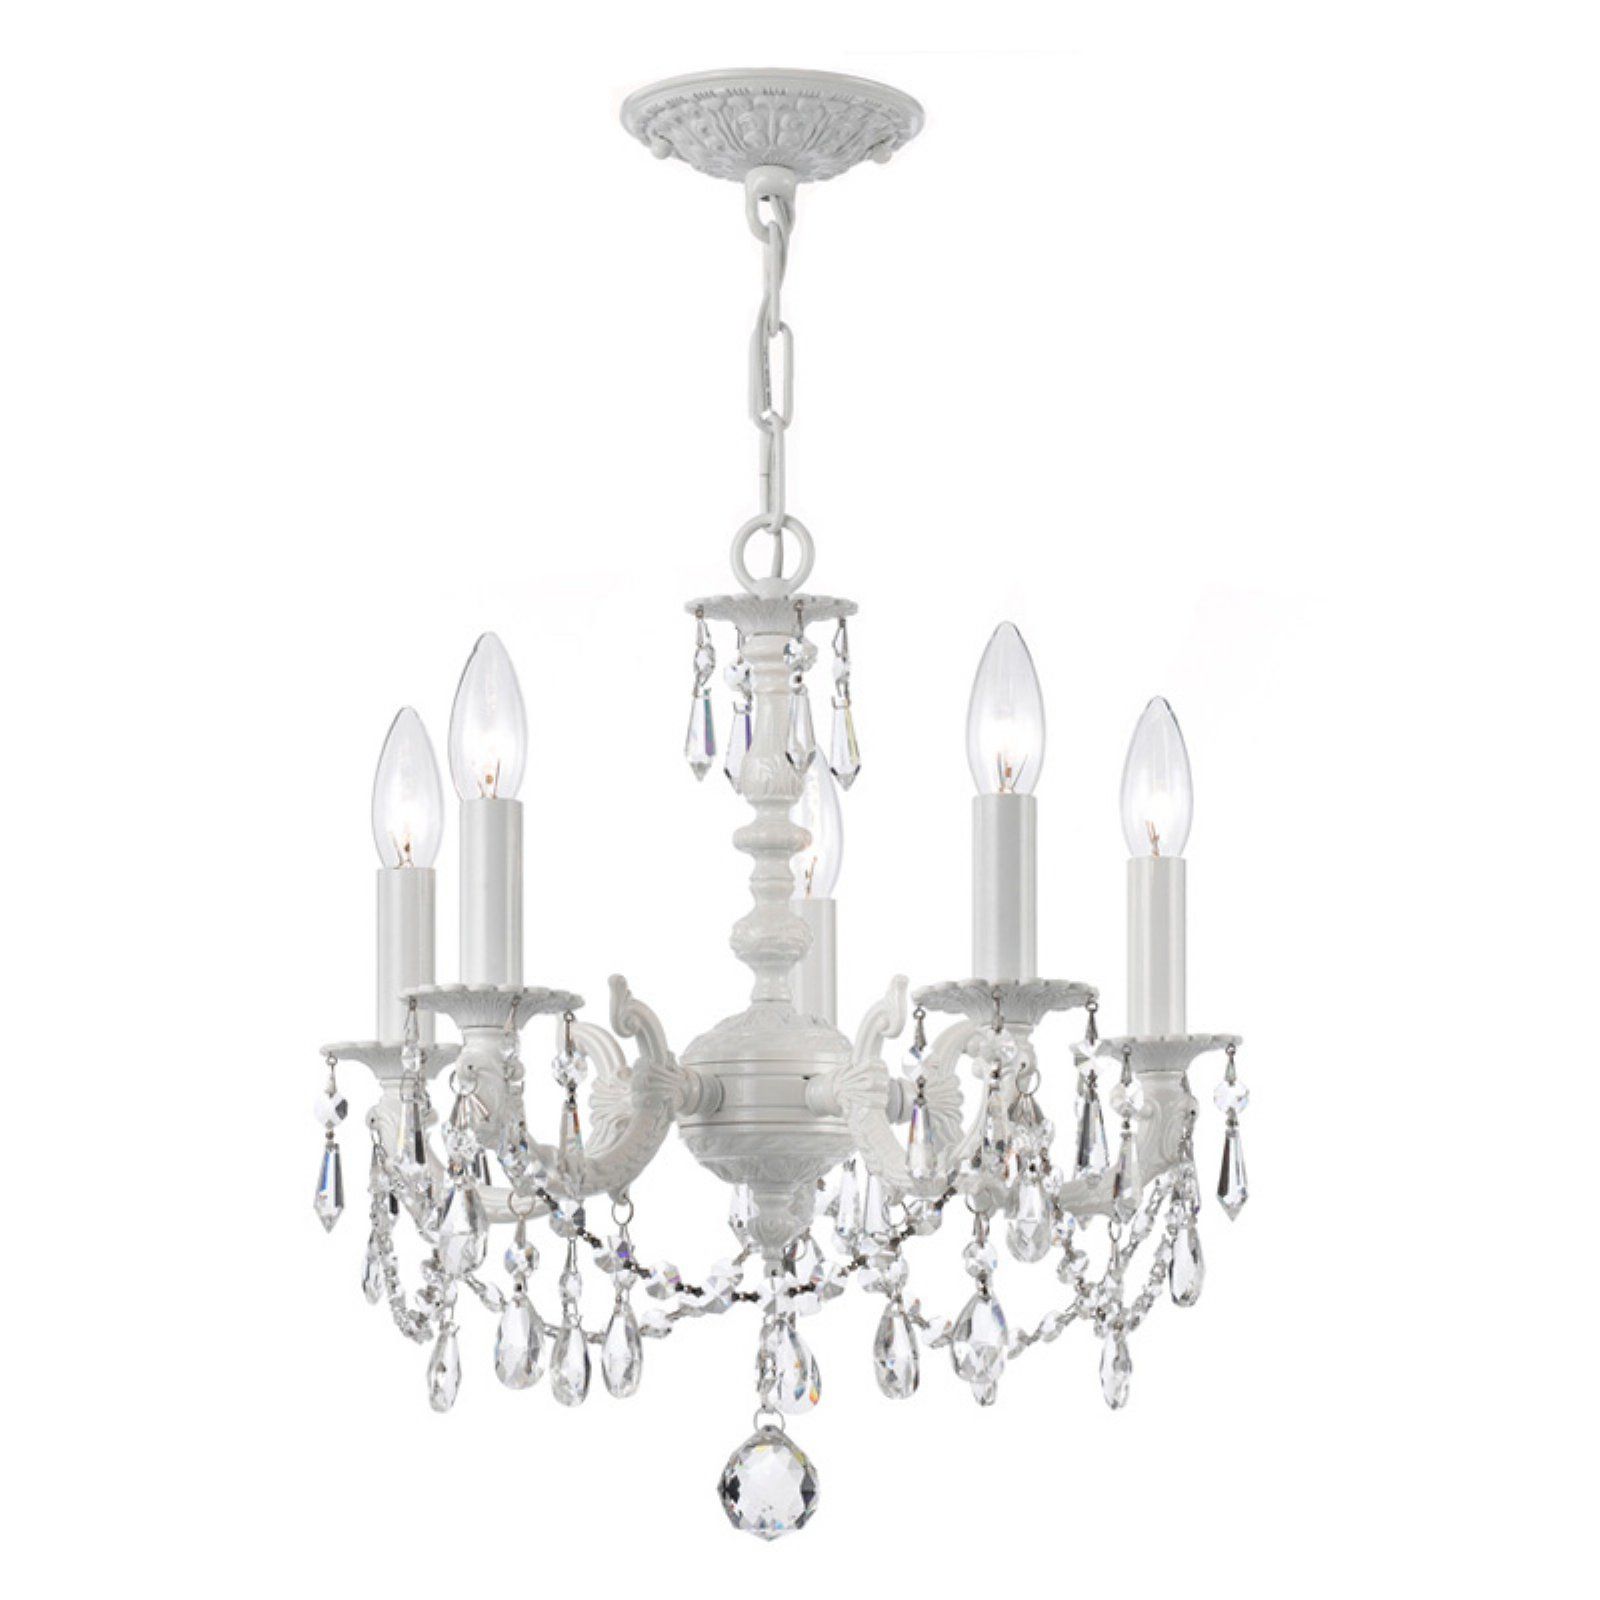 Crystorama Paris Market 5515 Ww Cl Mwp 5 Light Chandelier Within Blanchette 5 Light Candle Style Chandeliers (Photo 9 of 30)